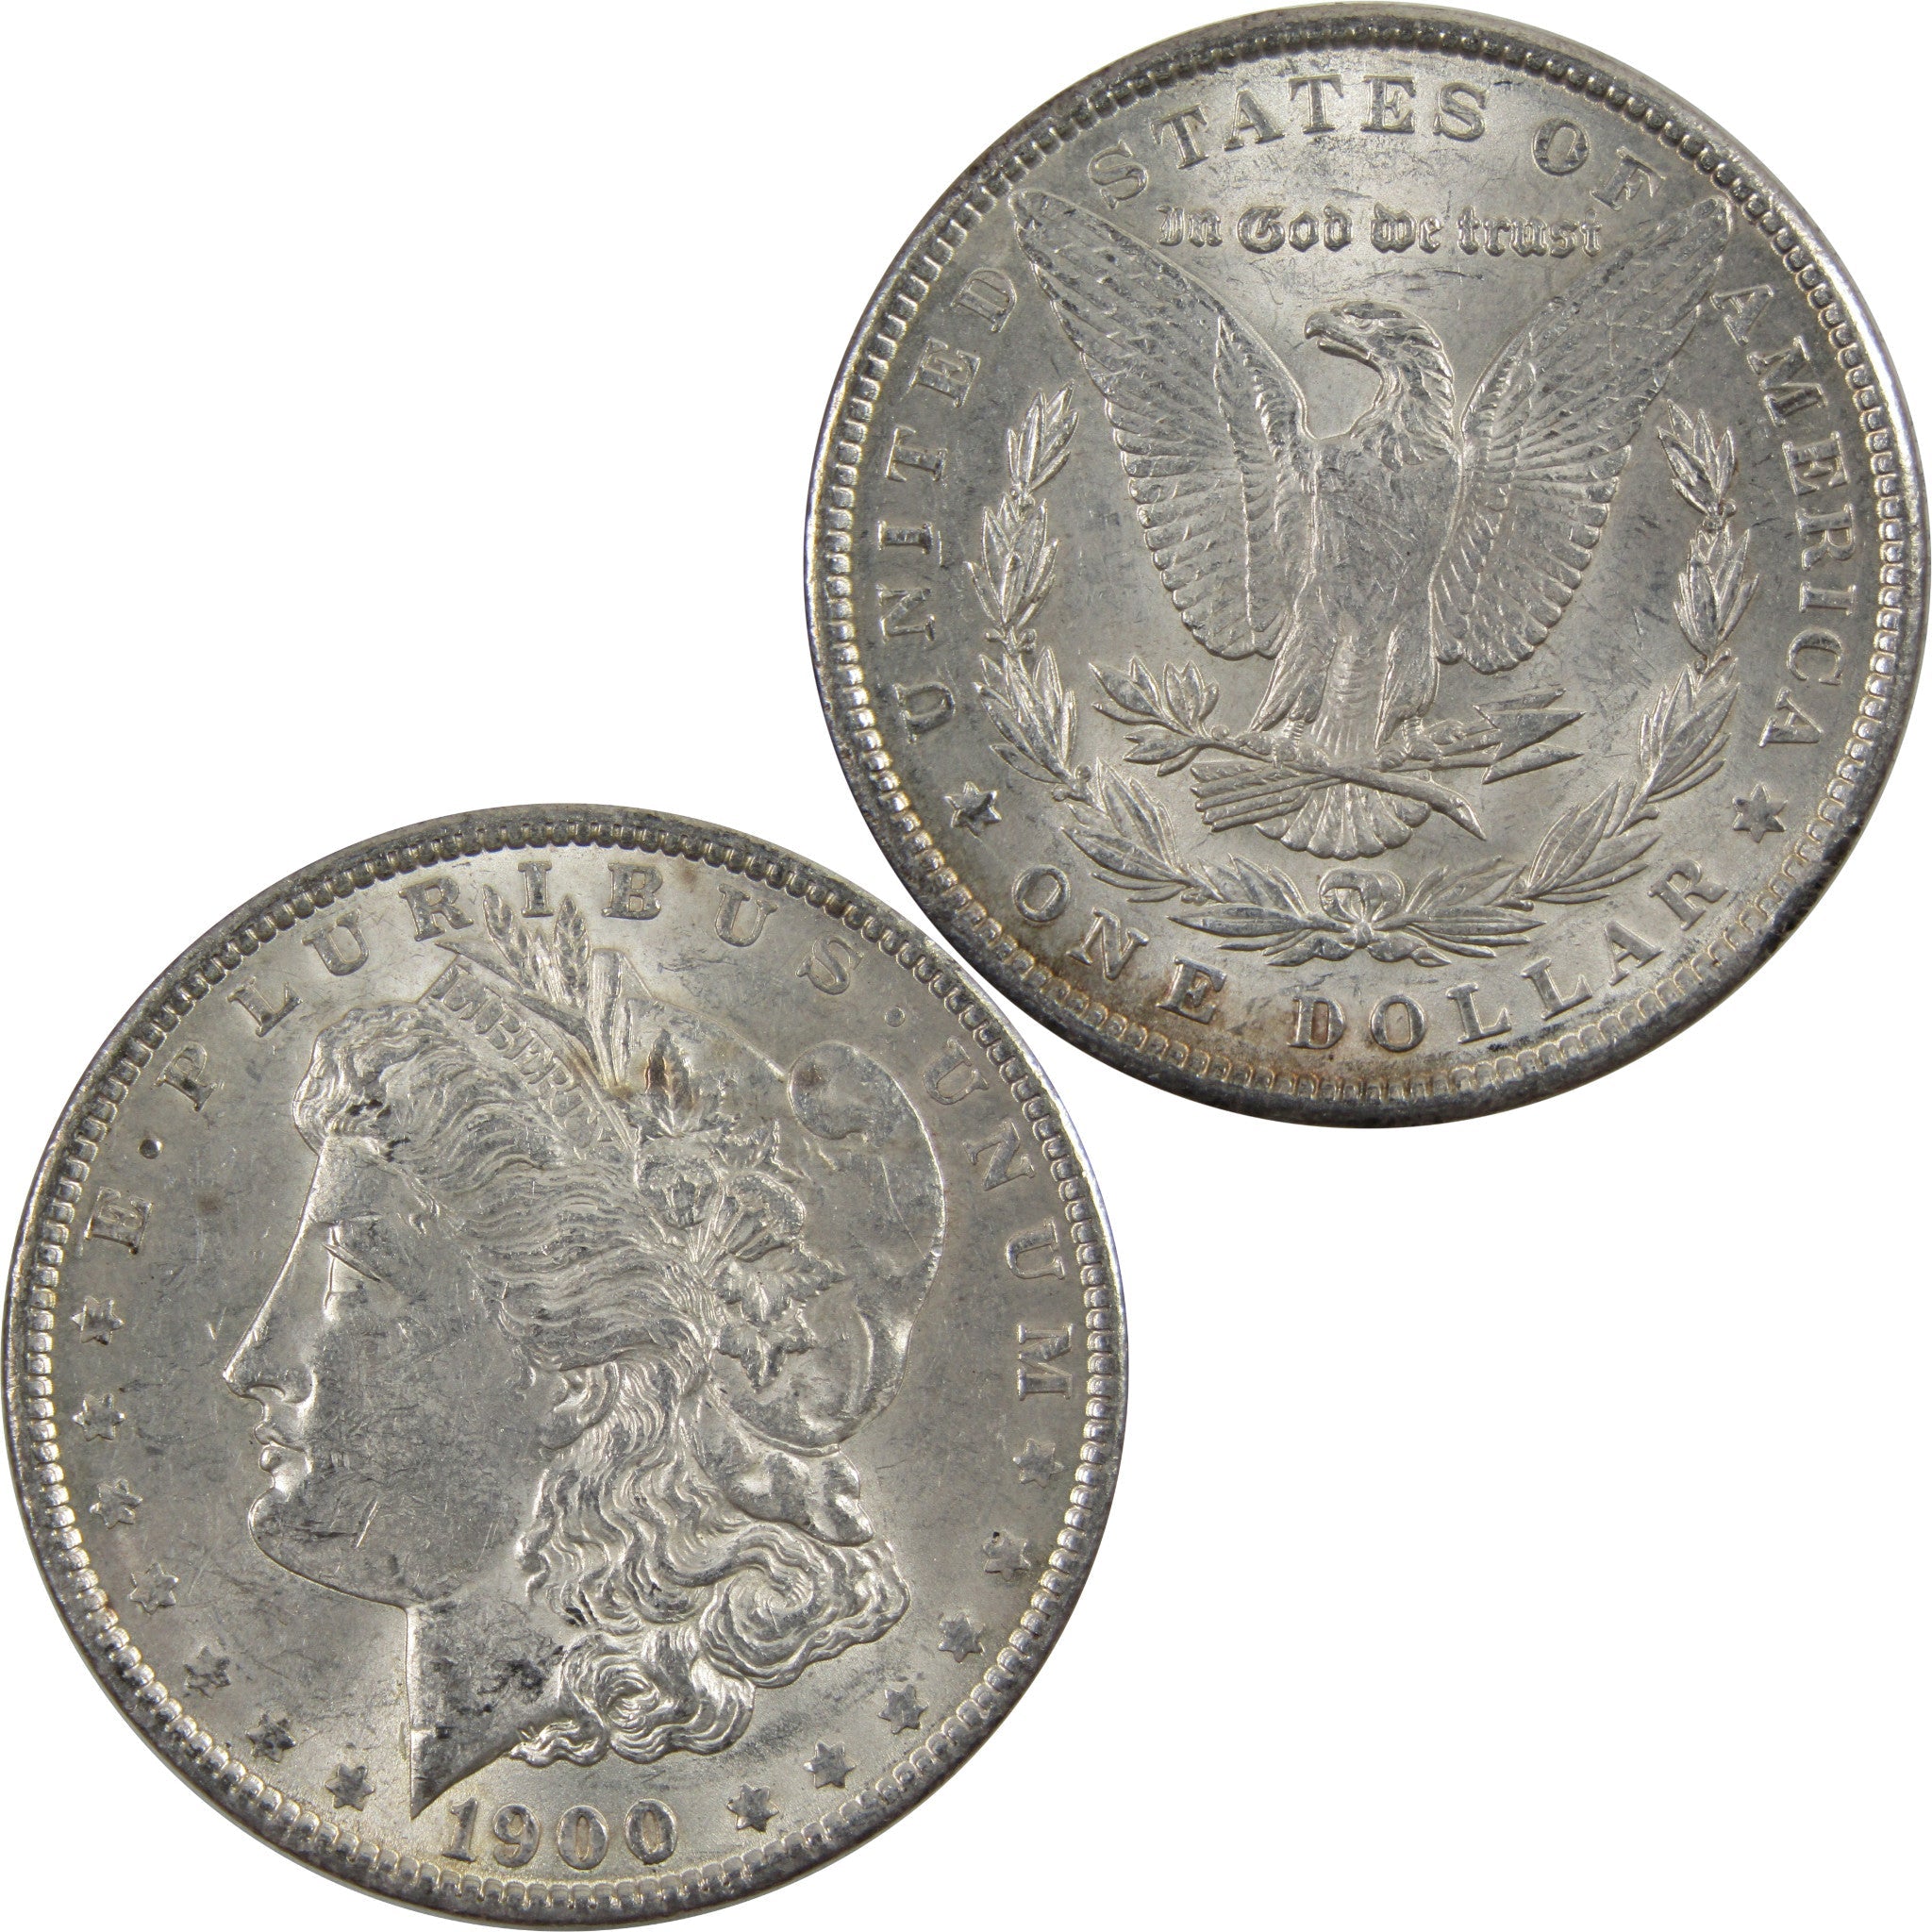 1900 Morgan Dollar AU About Uncirculated 90% Silver $1 Coin SKU:I5510 - Morgan coin - Morgan silver dollar - Morgan silver dollar for sale - Profile Coins &amp; Collectibles